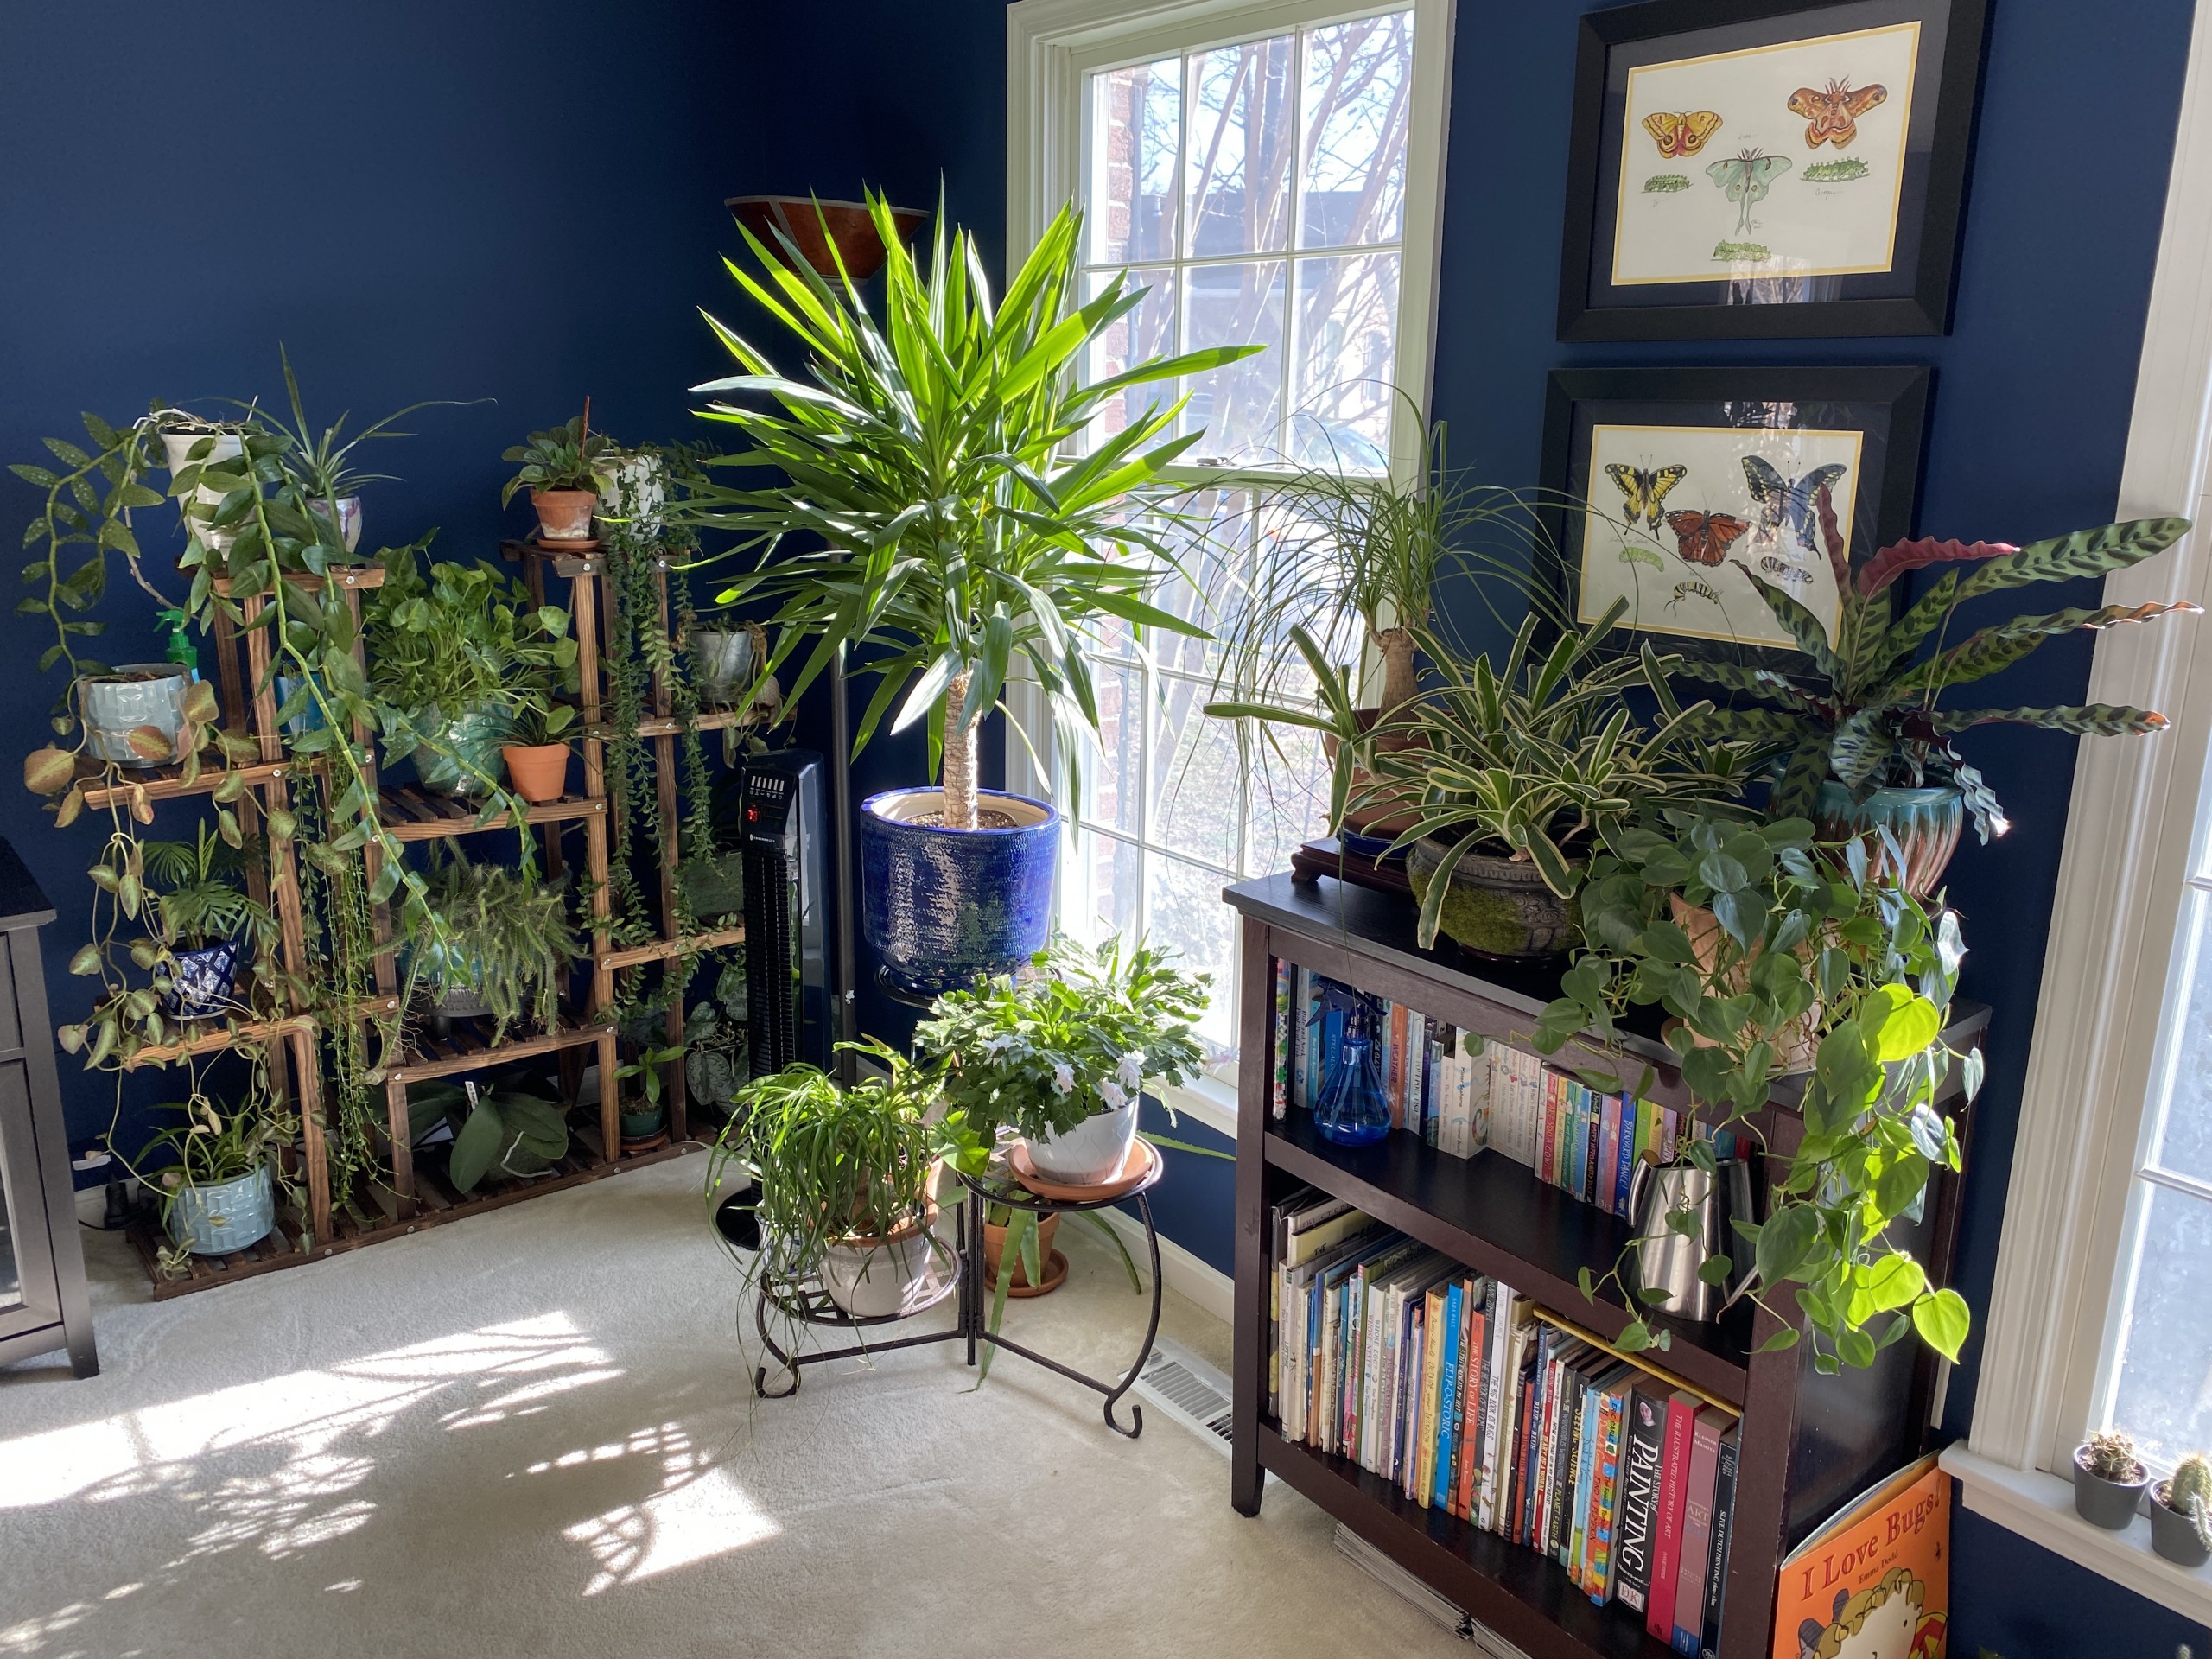 Top Ten Plant Care Tips for Houseplants & Indoor Plants - The Sill